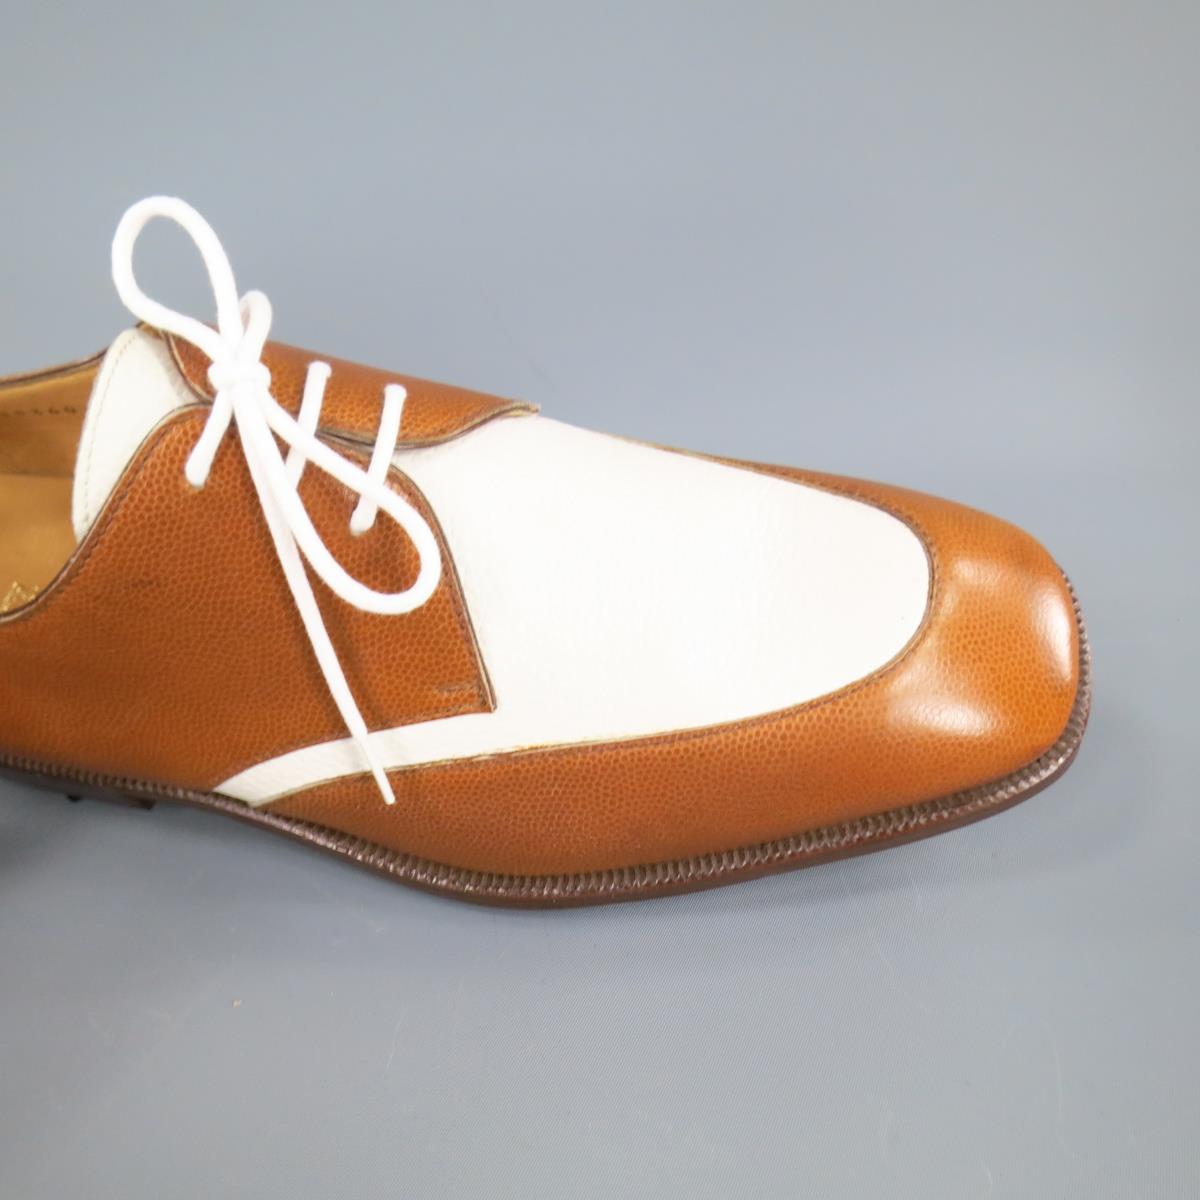 GRAVATI Size 8.5 Tan & White Leather Two Tone Lace Up Golf Shoes